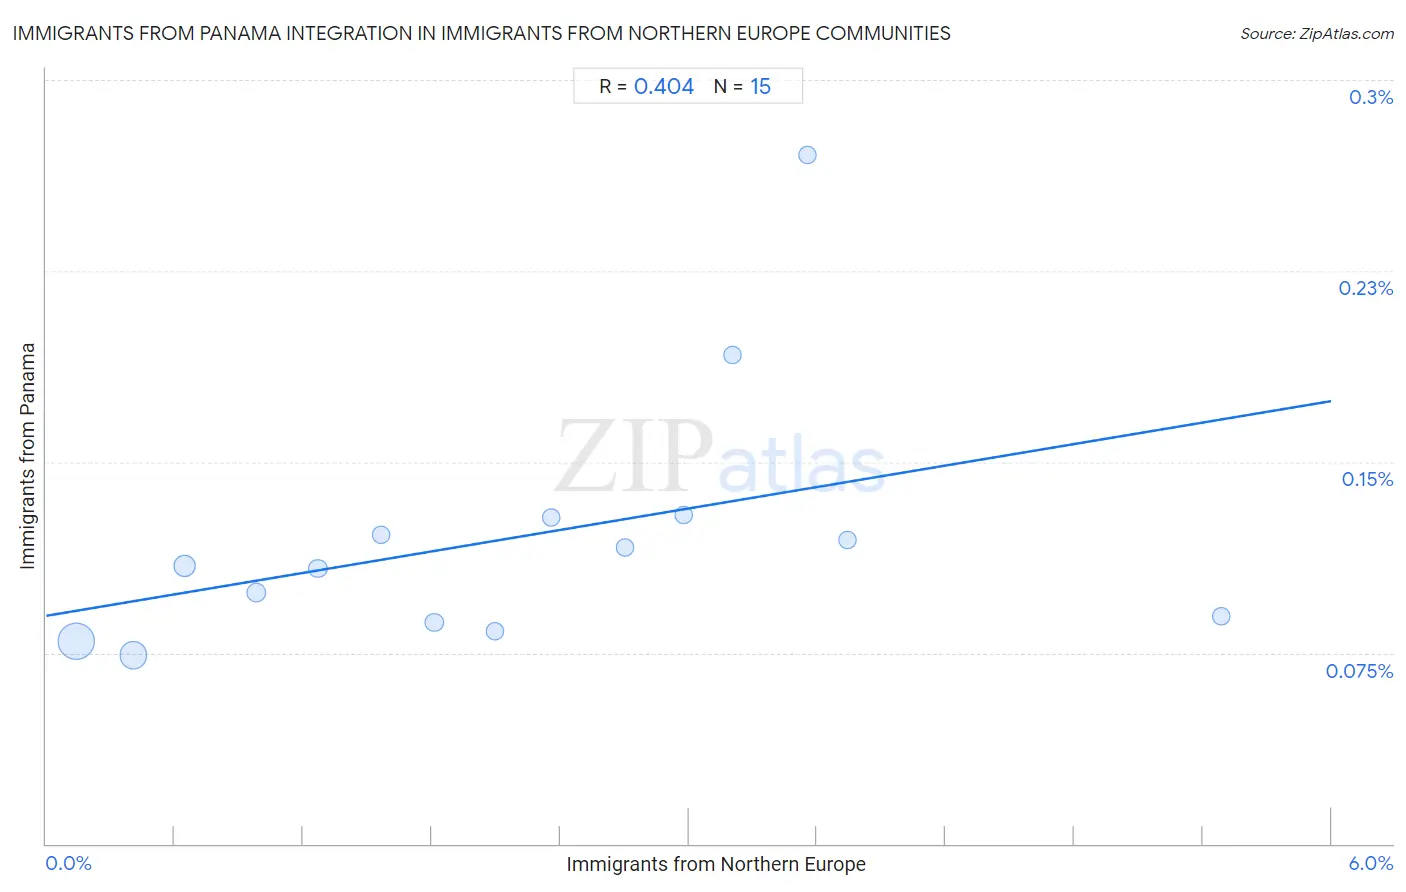 Immigrants from Northern Europe Integration in Immigrants from Panama Communities